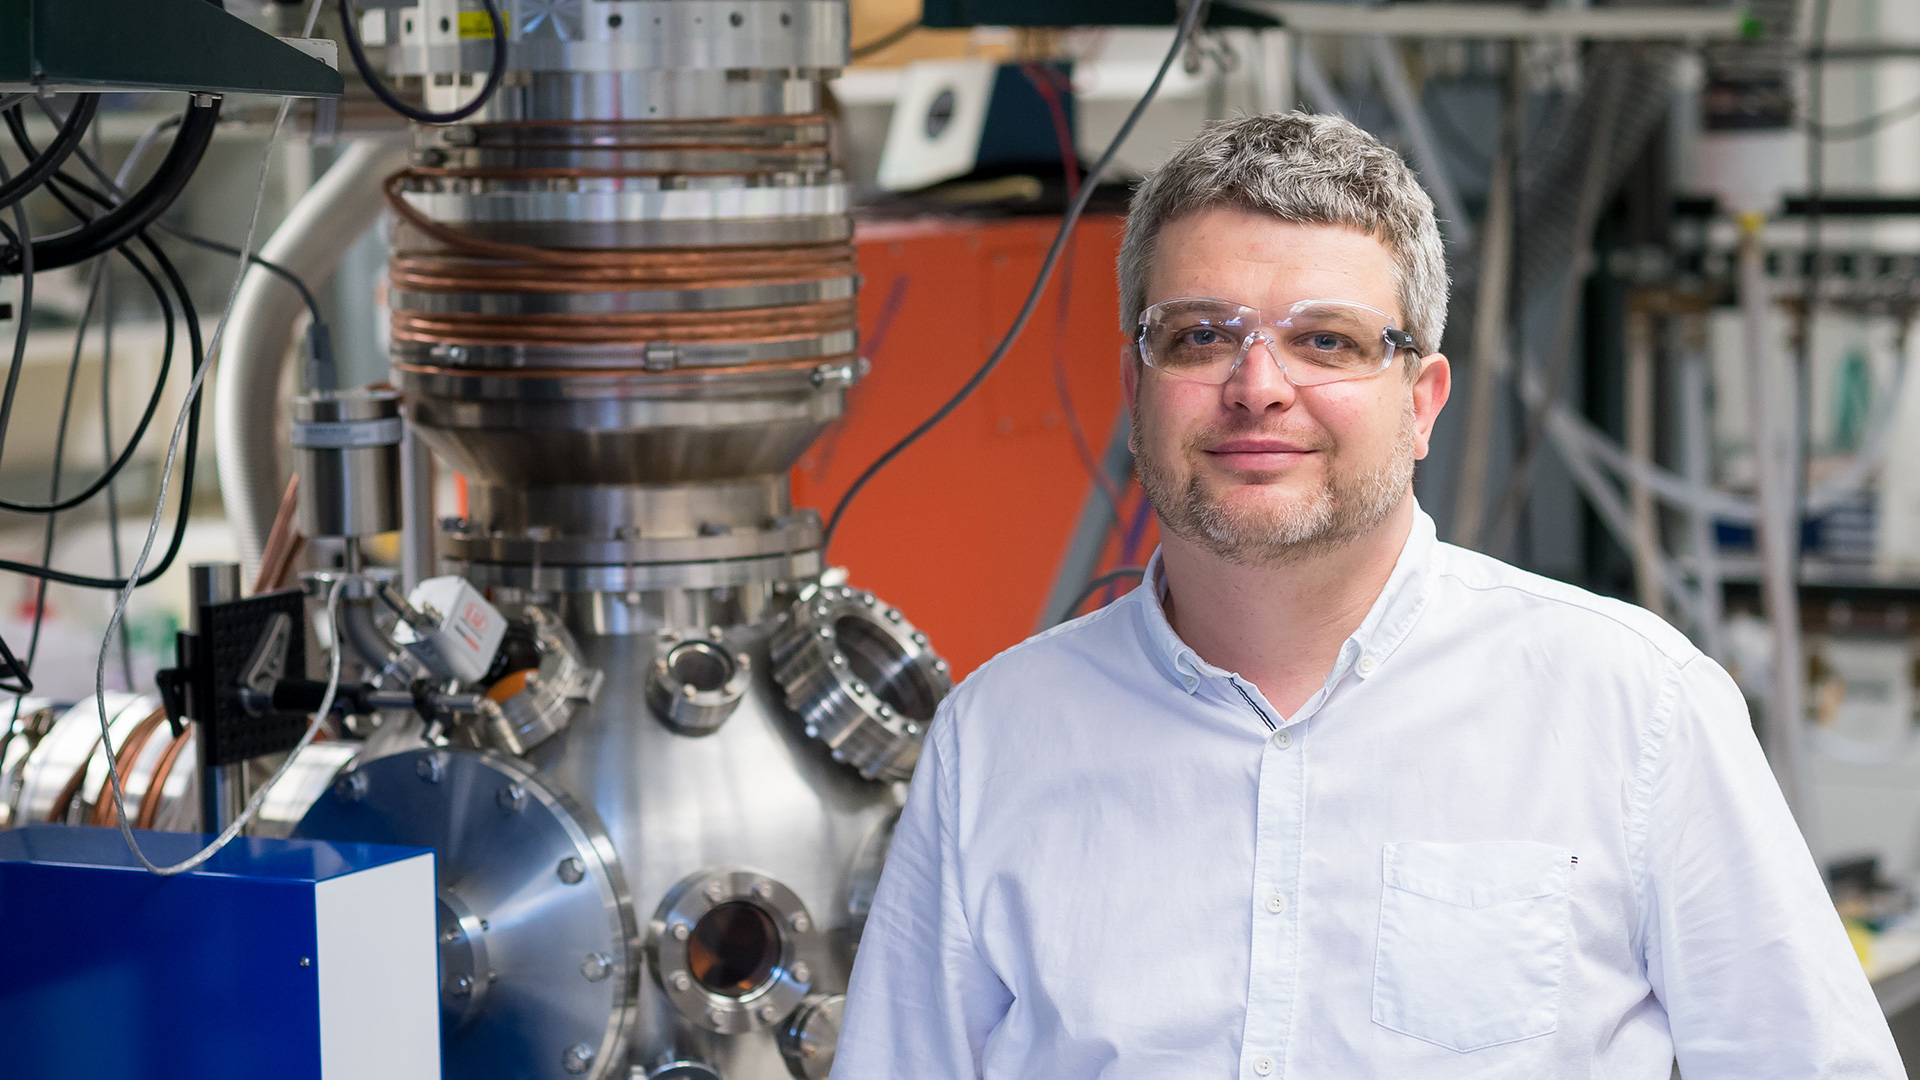 Kirill Prozument of the RAINet team. Not pictured from the RAINet team is Daniel Zaleski. (Image by Argonne National Laboratory.)